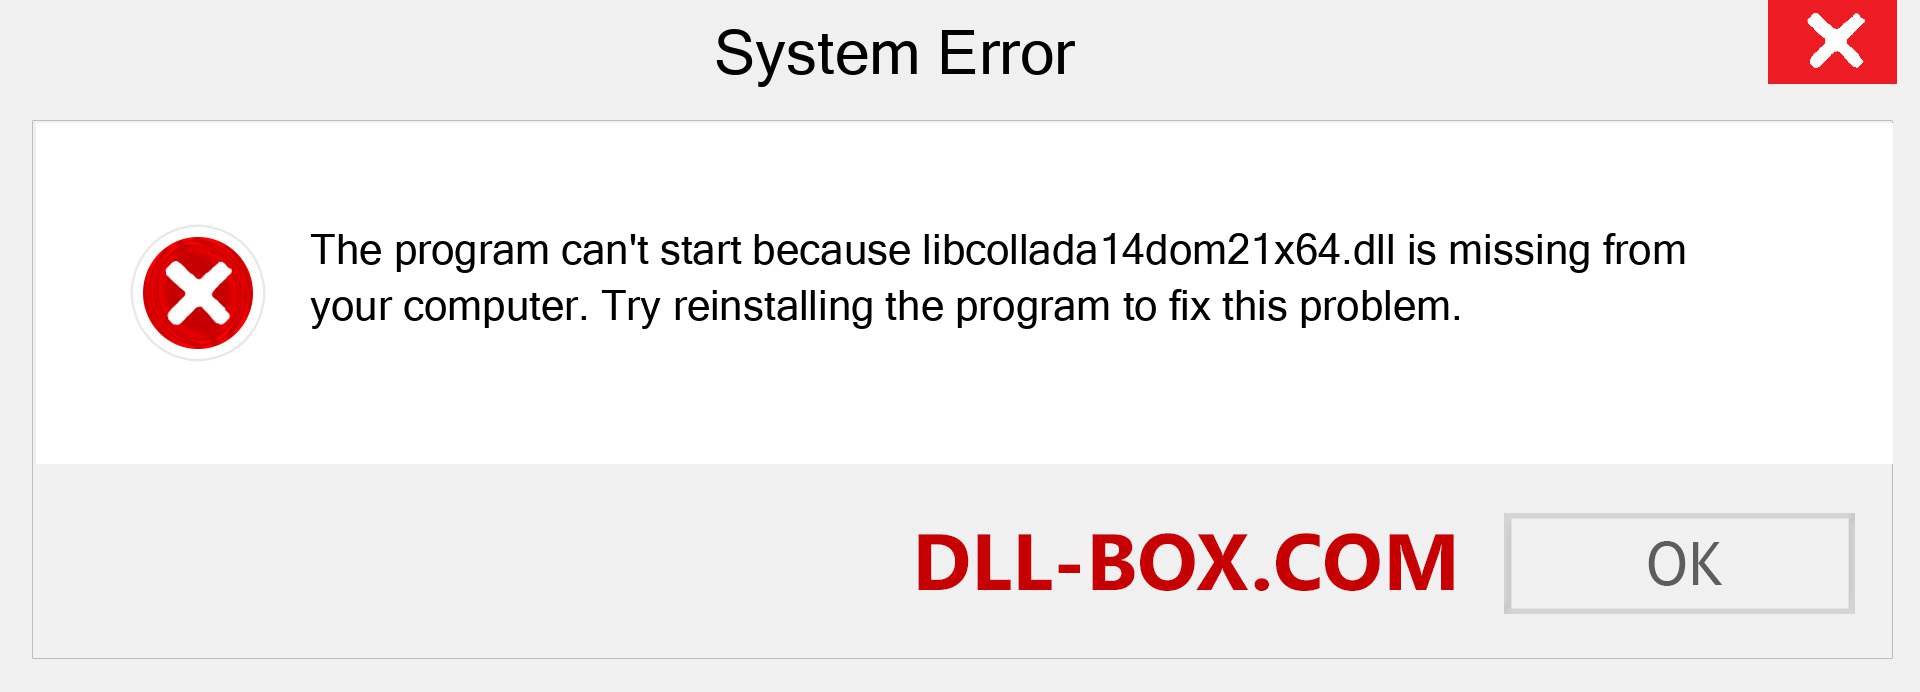  libcollada14dom21x64.dll file is missing?. Download for Windows 7, 8, 10 - Fix  libcollada14dom21x64 dll Missing Error on Windows, photos, images